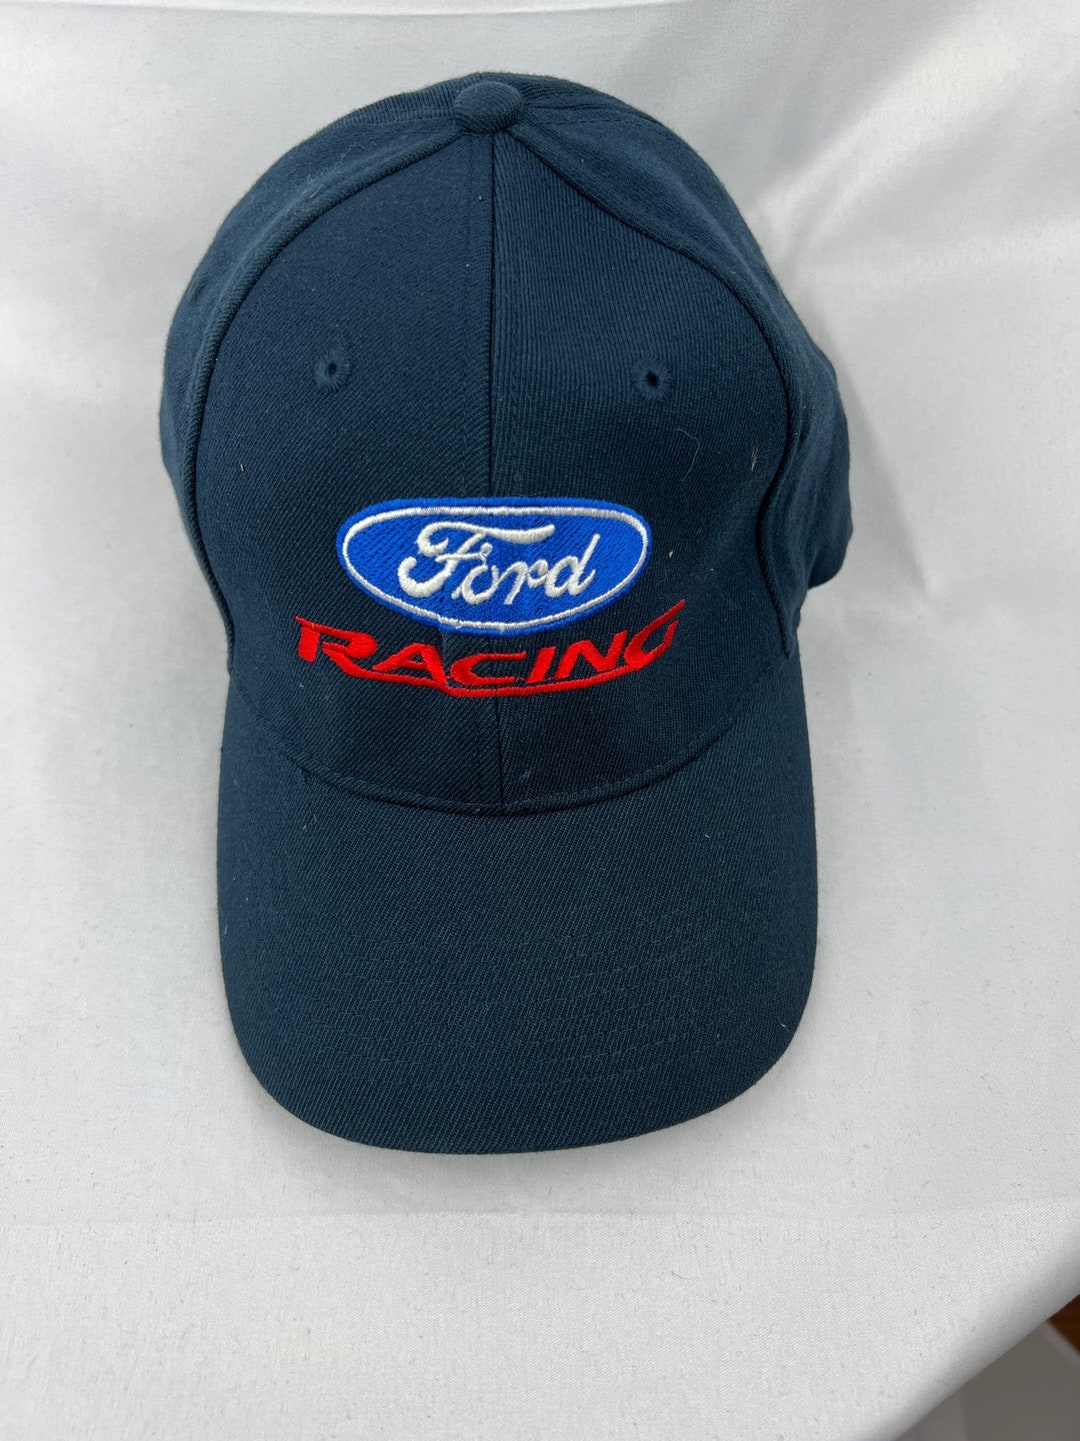 Classic Ford Racing Hat - Etsy